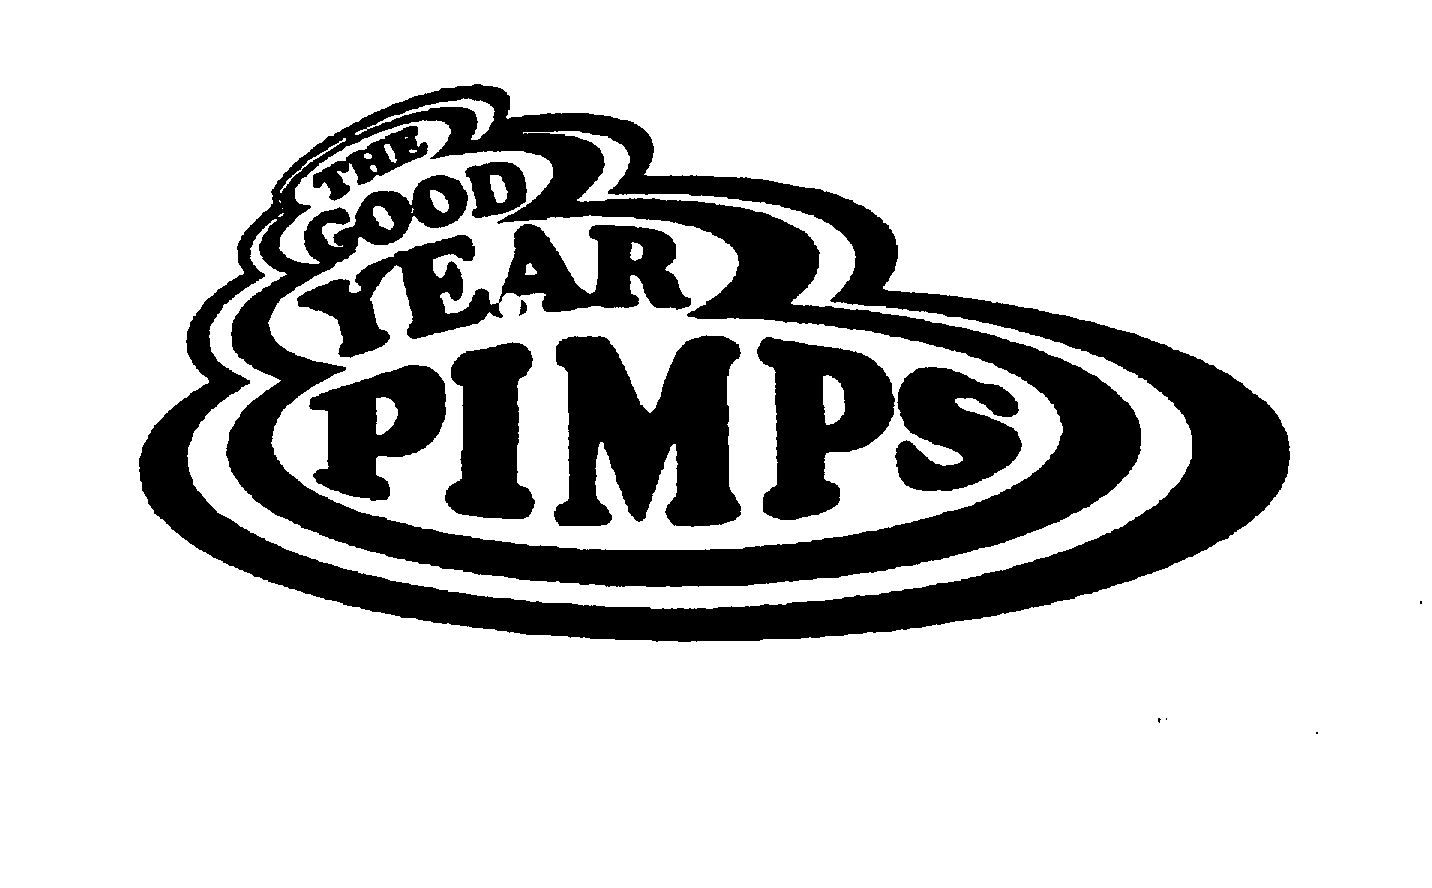  THE GOOD YEAR PIMPS